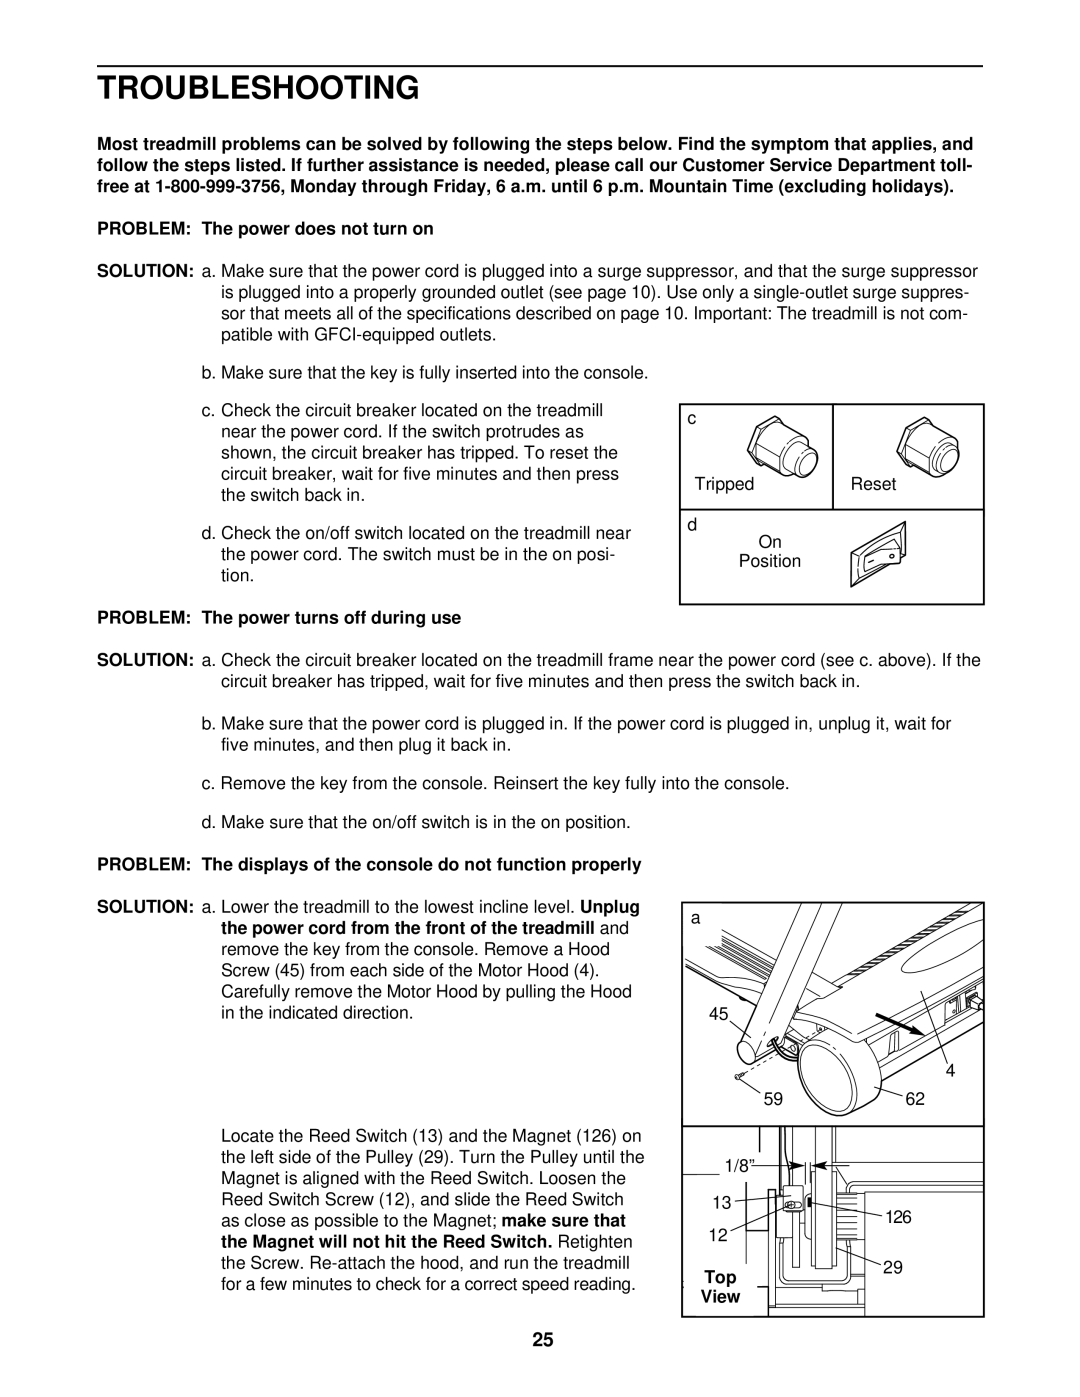 ProForm PFTL69711 user manual Troubleshooting, Problem The power turns off during use, Top 